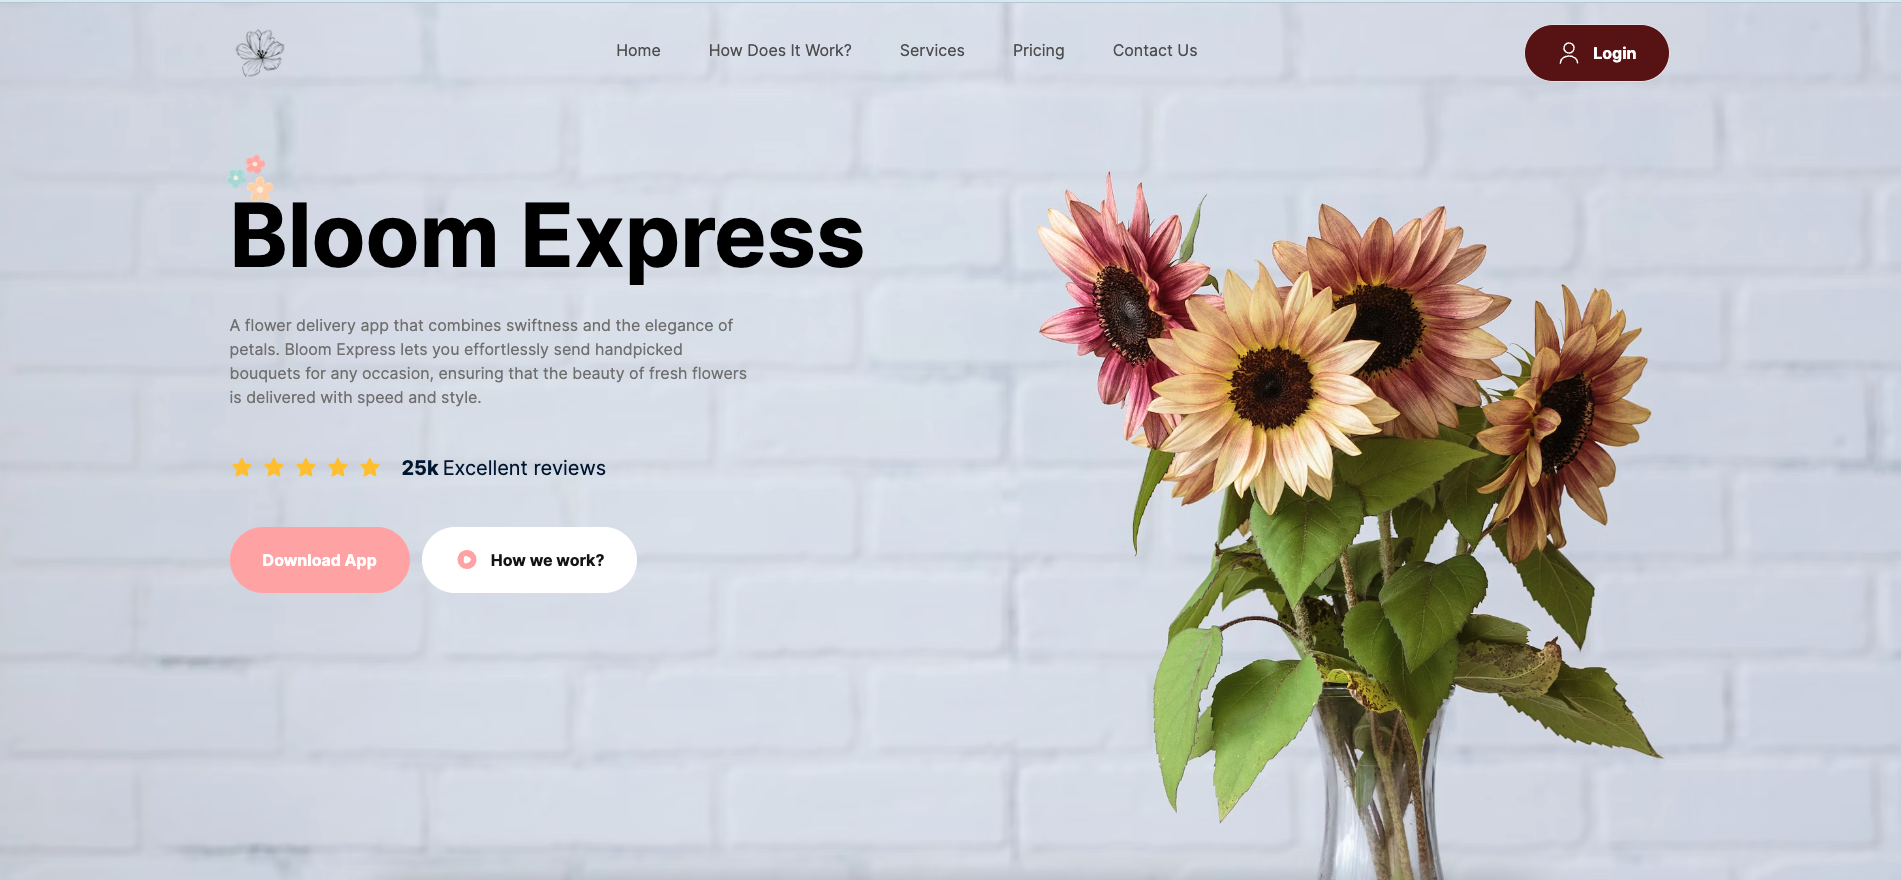 An image of the Bloom Express project.